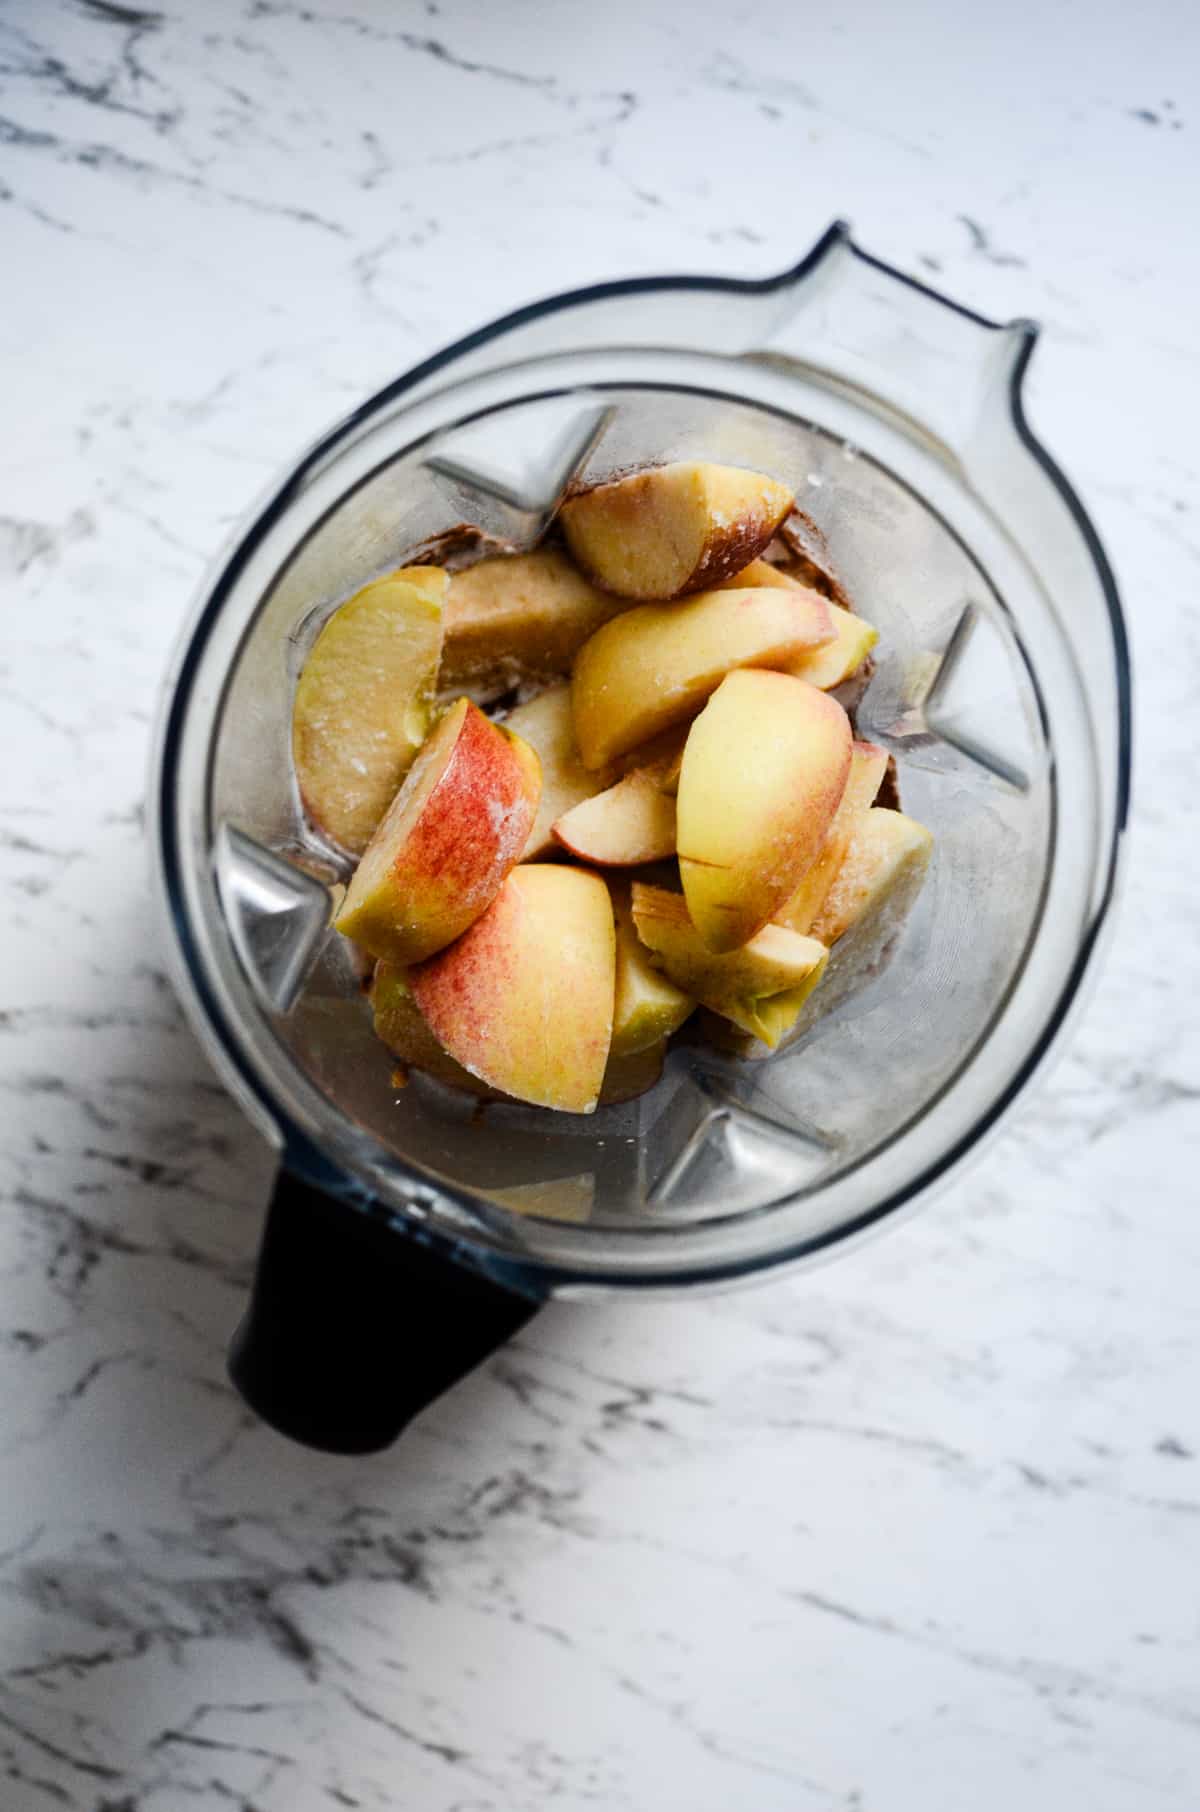 Frozen apples in the blender for a smoothie.